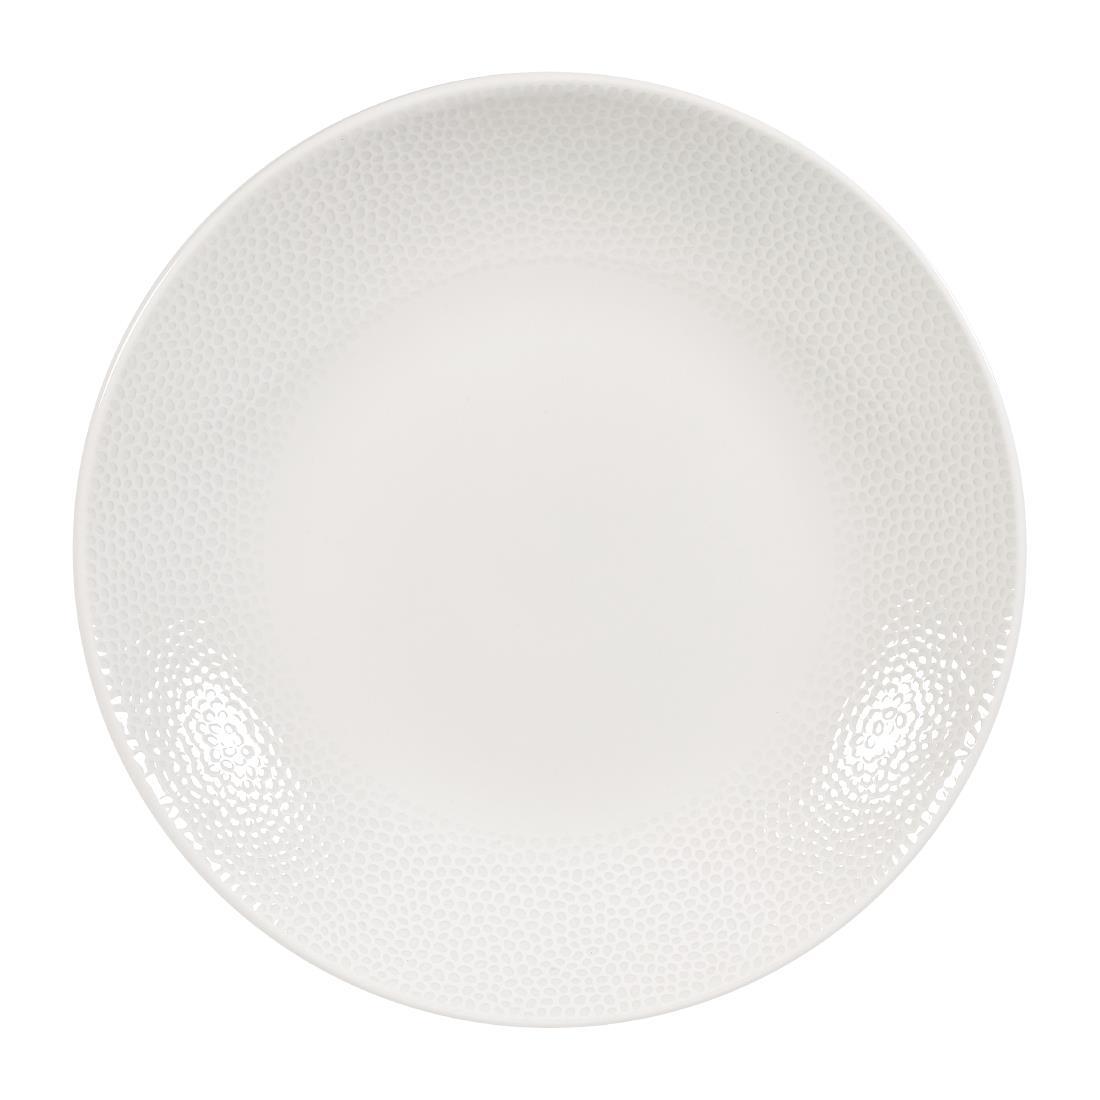 Churchill Isla Deep Coupe Plates White 281mm (Pack of 12) - FA681  - 1